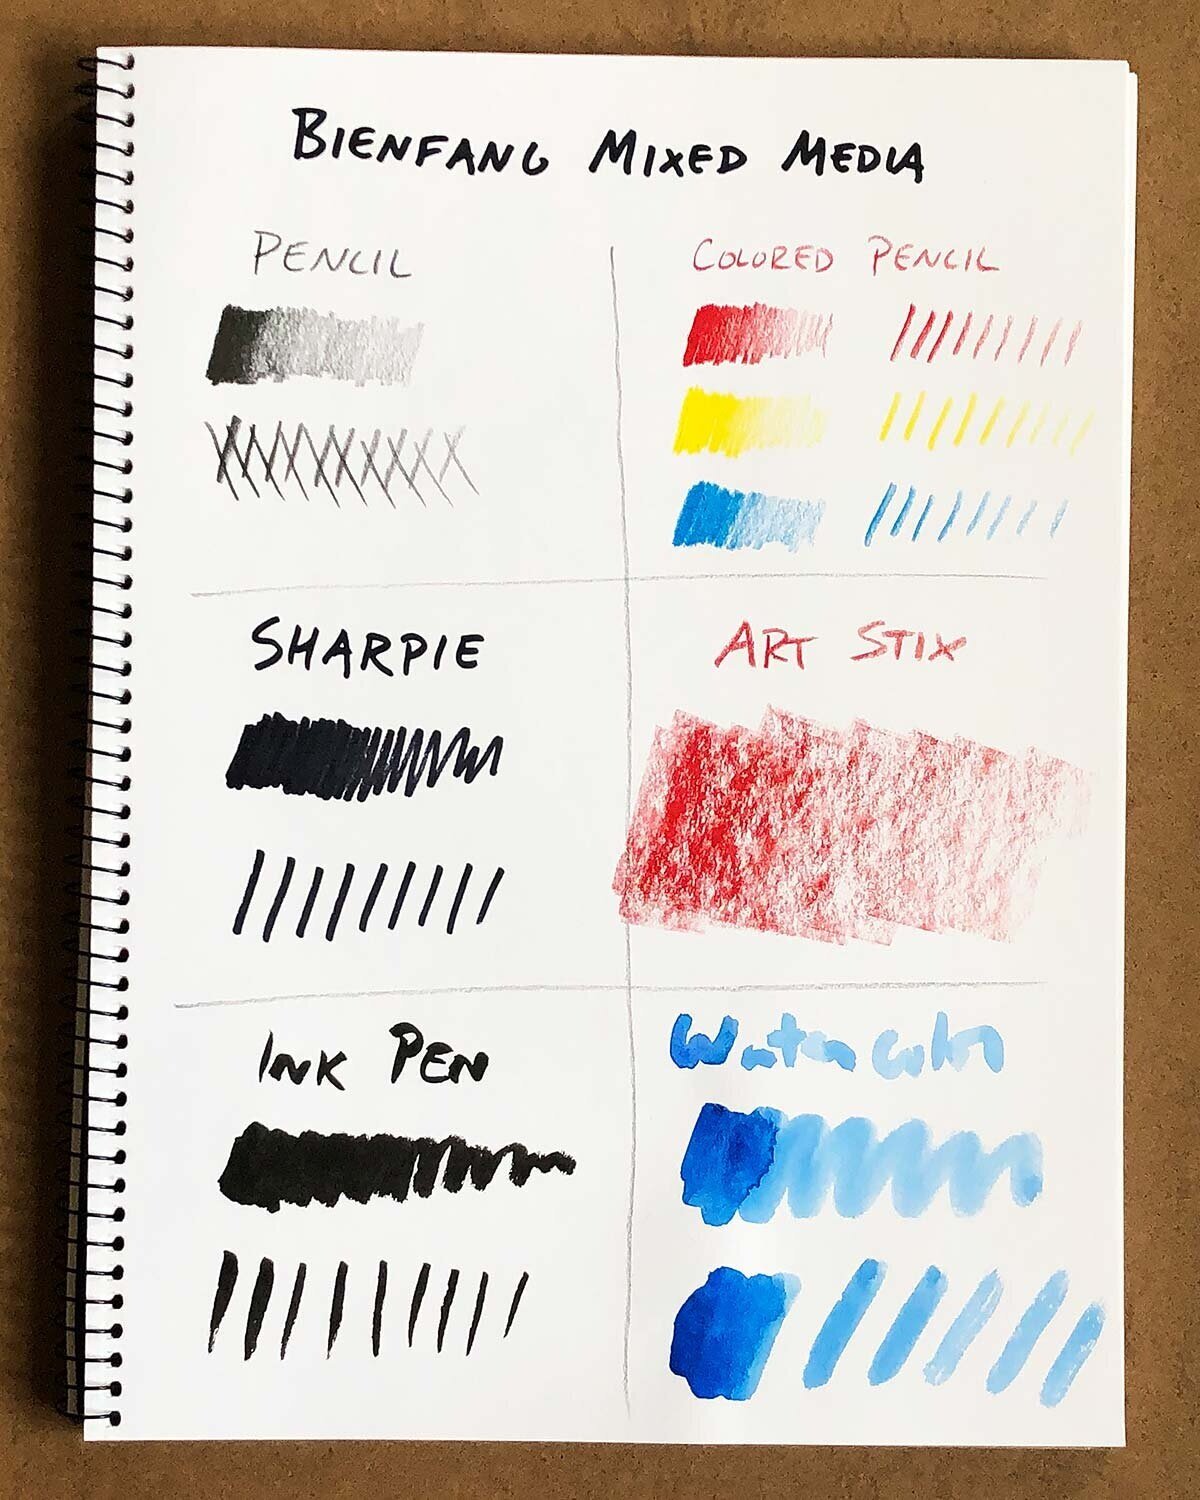 Best Mixed Media Sketchbooks and Drawing Pads — The Studio Manager